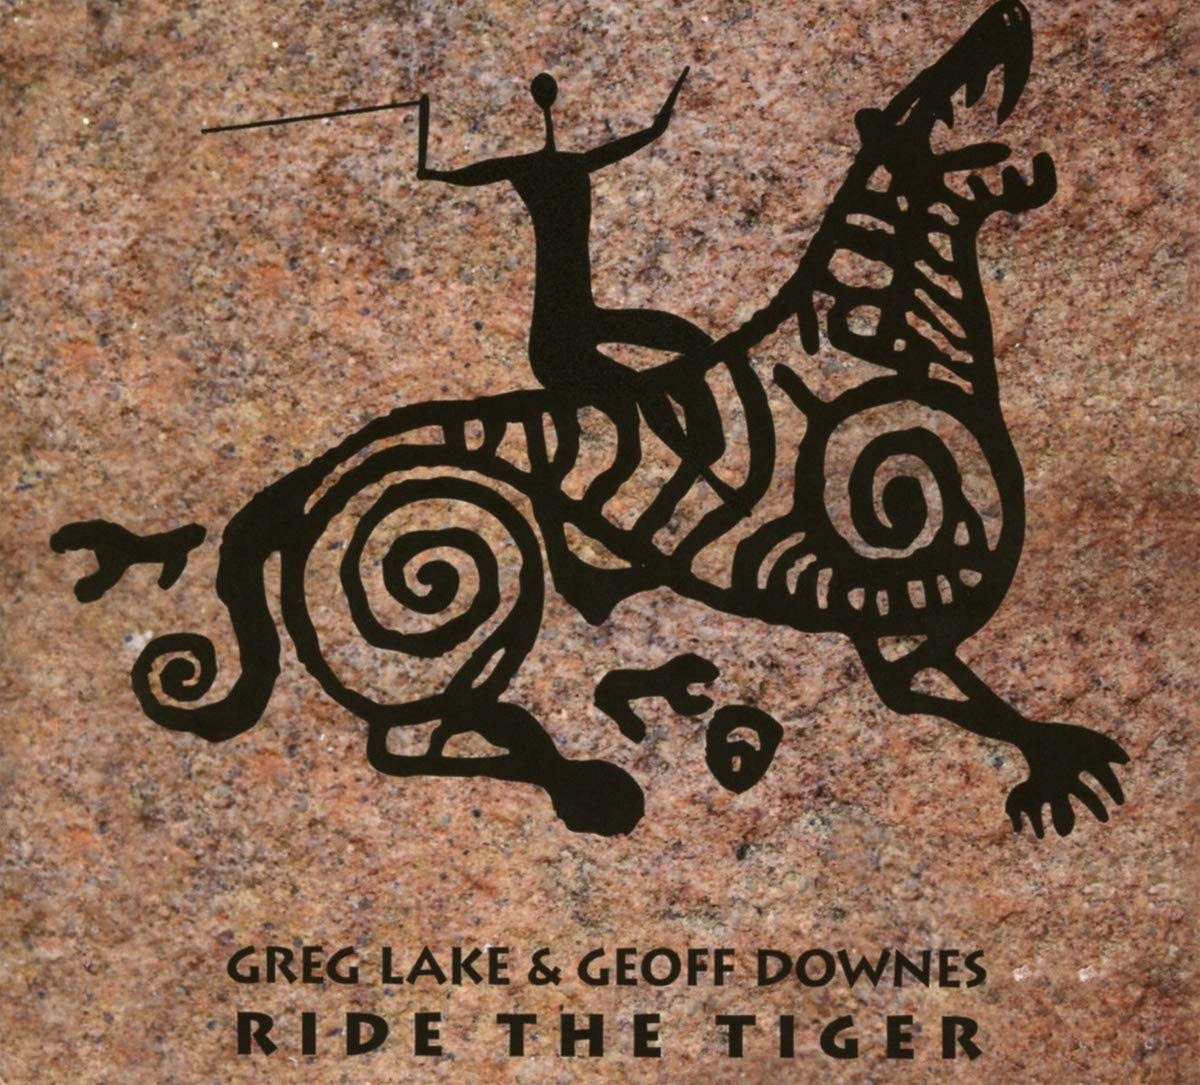 Greg Lake & Geoff Downes - Ride The Tiger (CD - Imported)